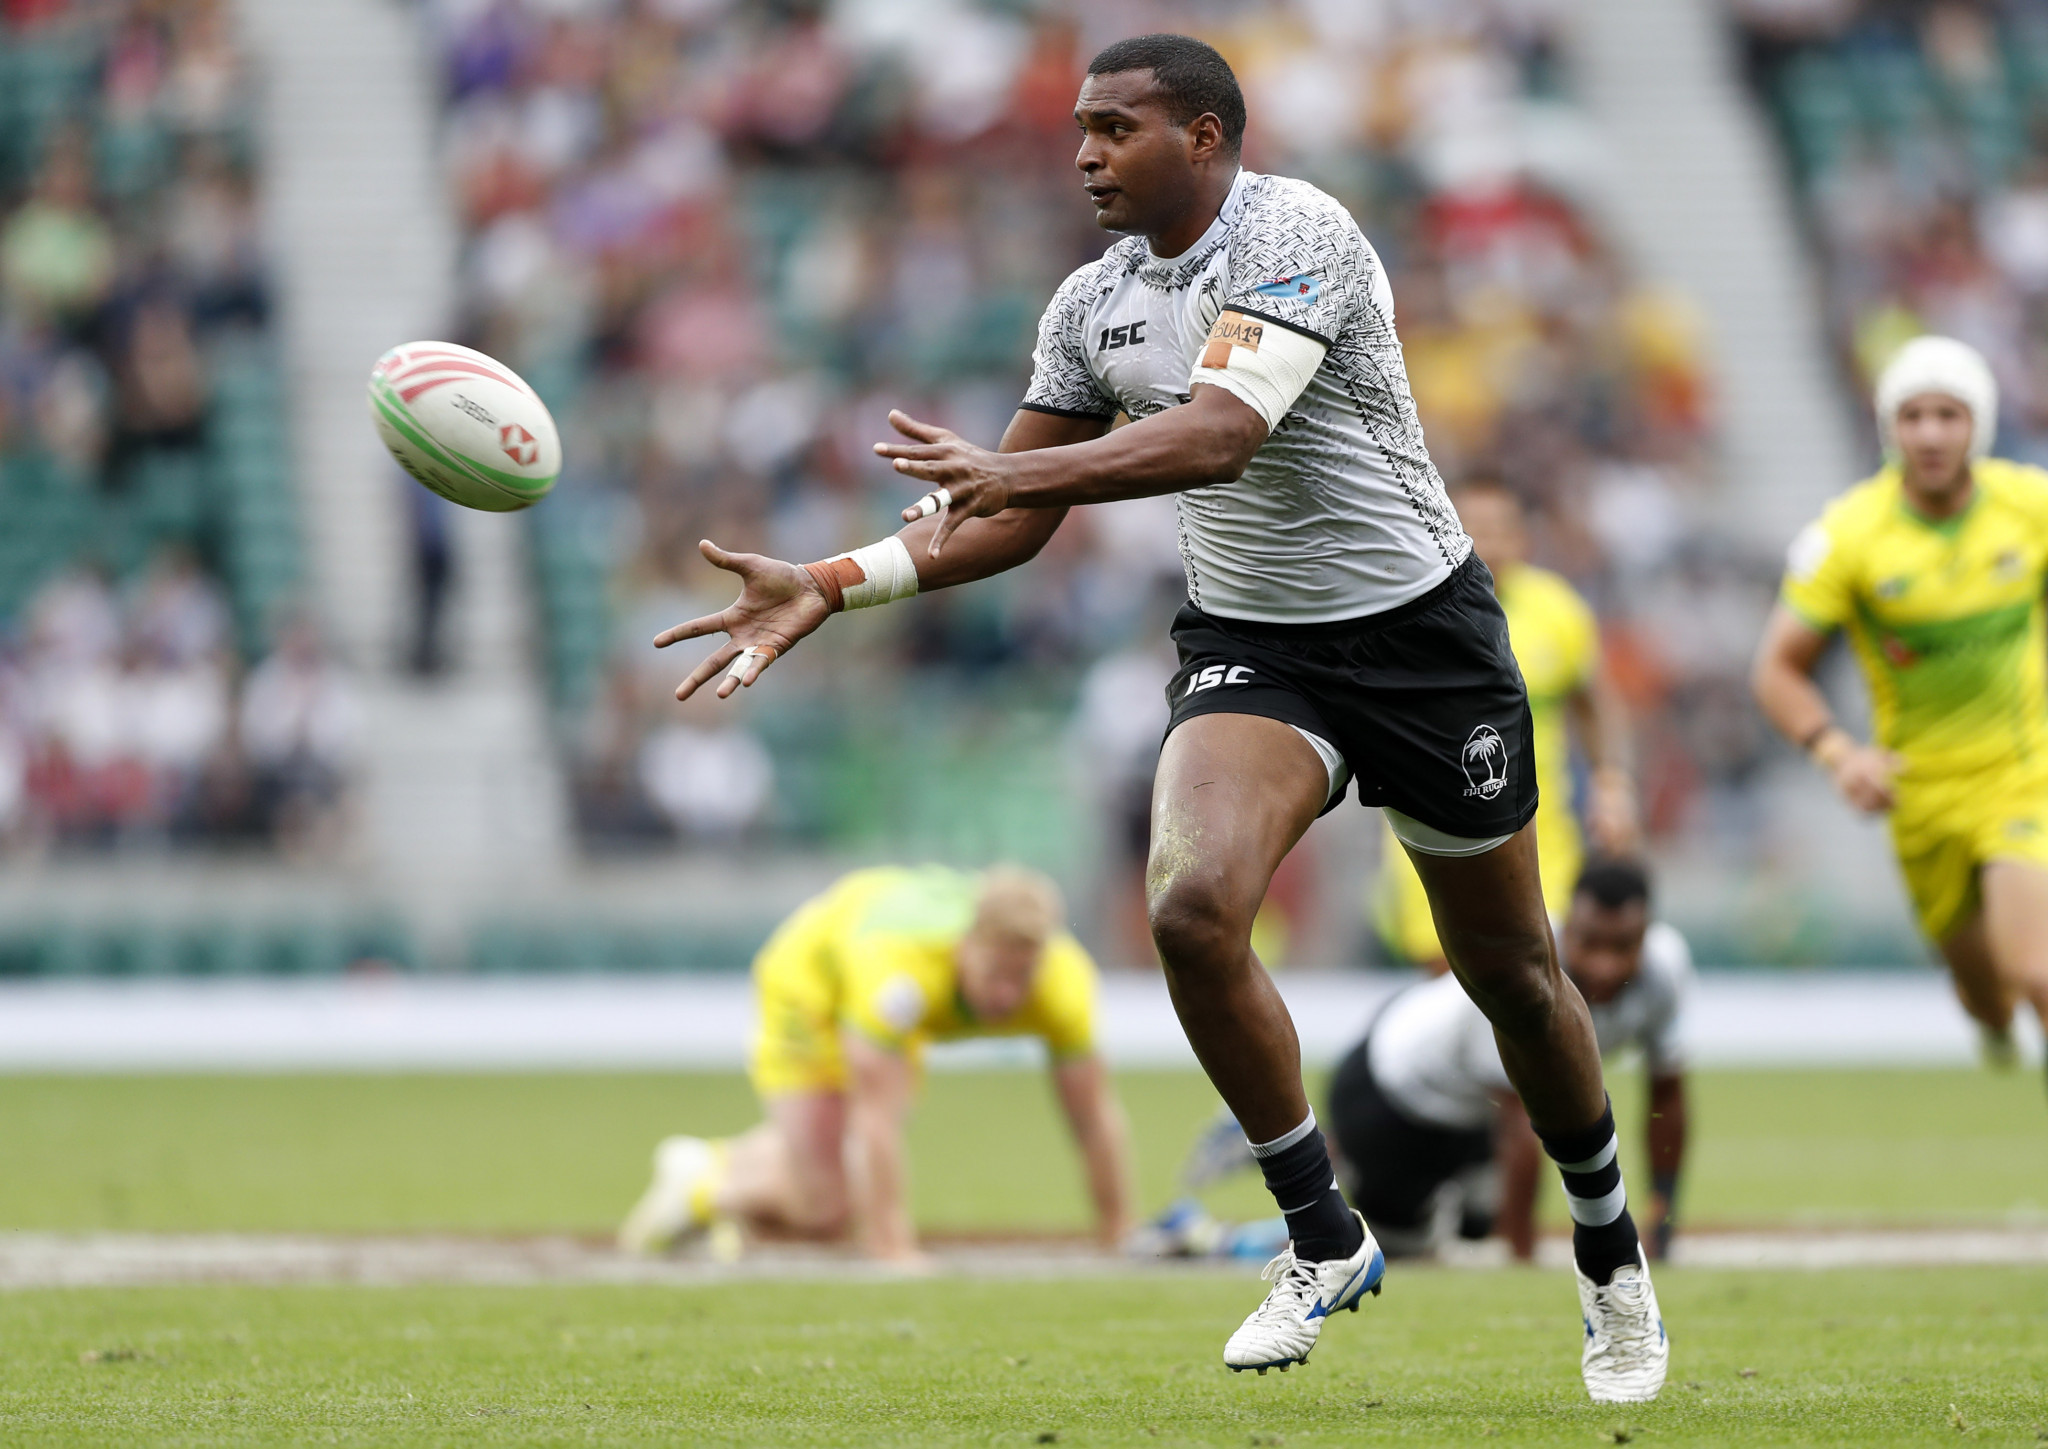 Fiji will battle it out with the US for top spot at the World Rugby Sevens Series ©Getty Images